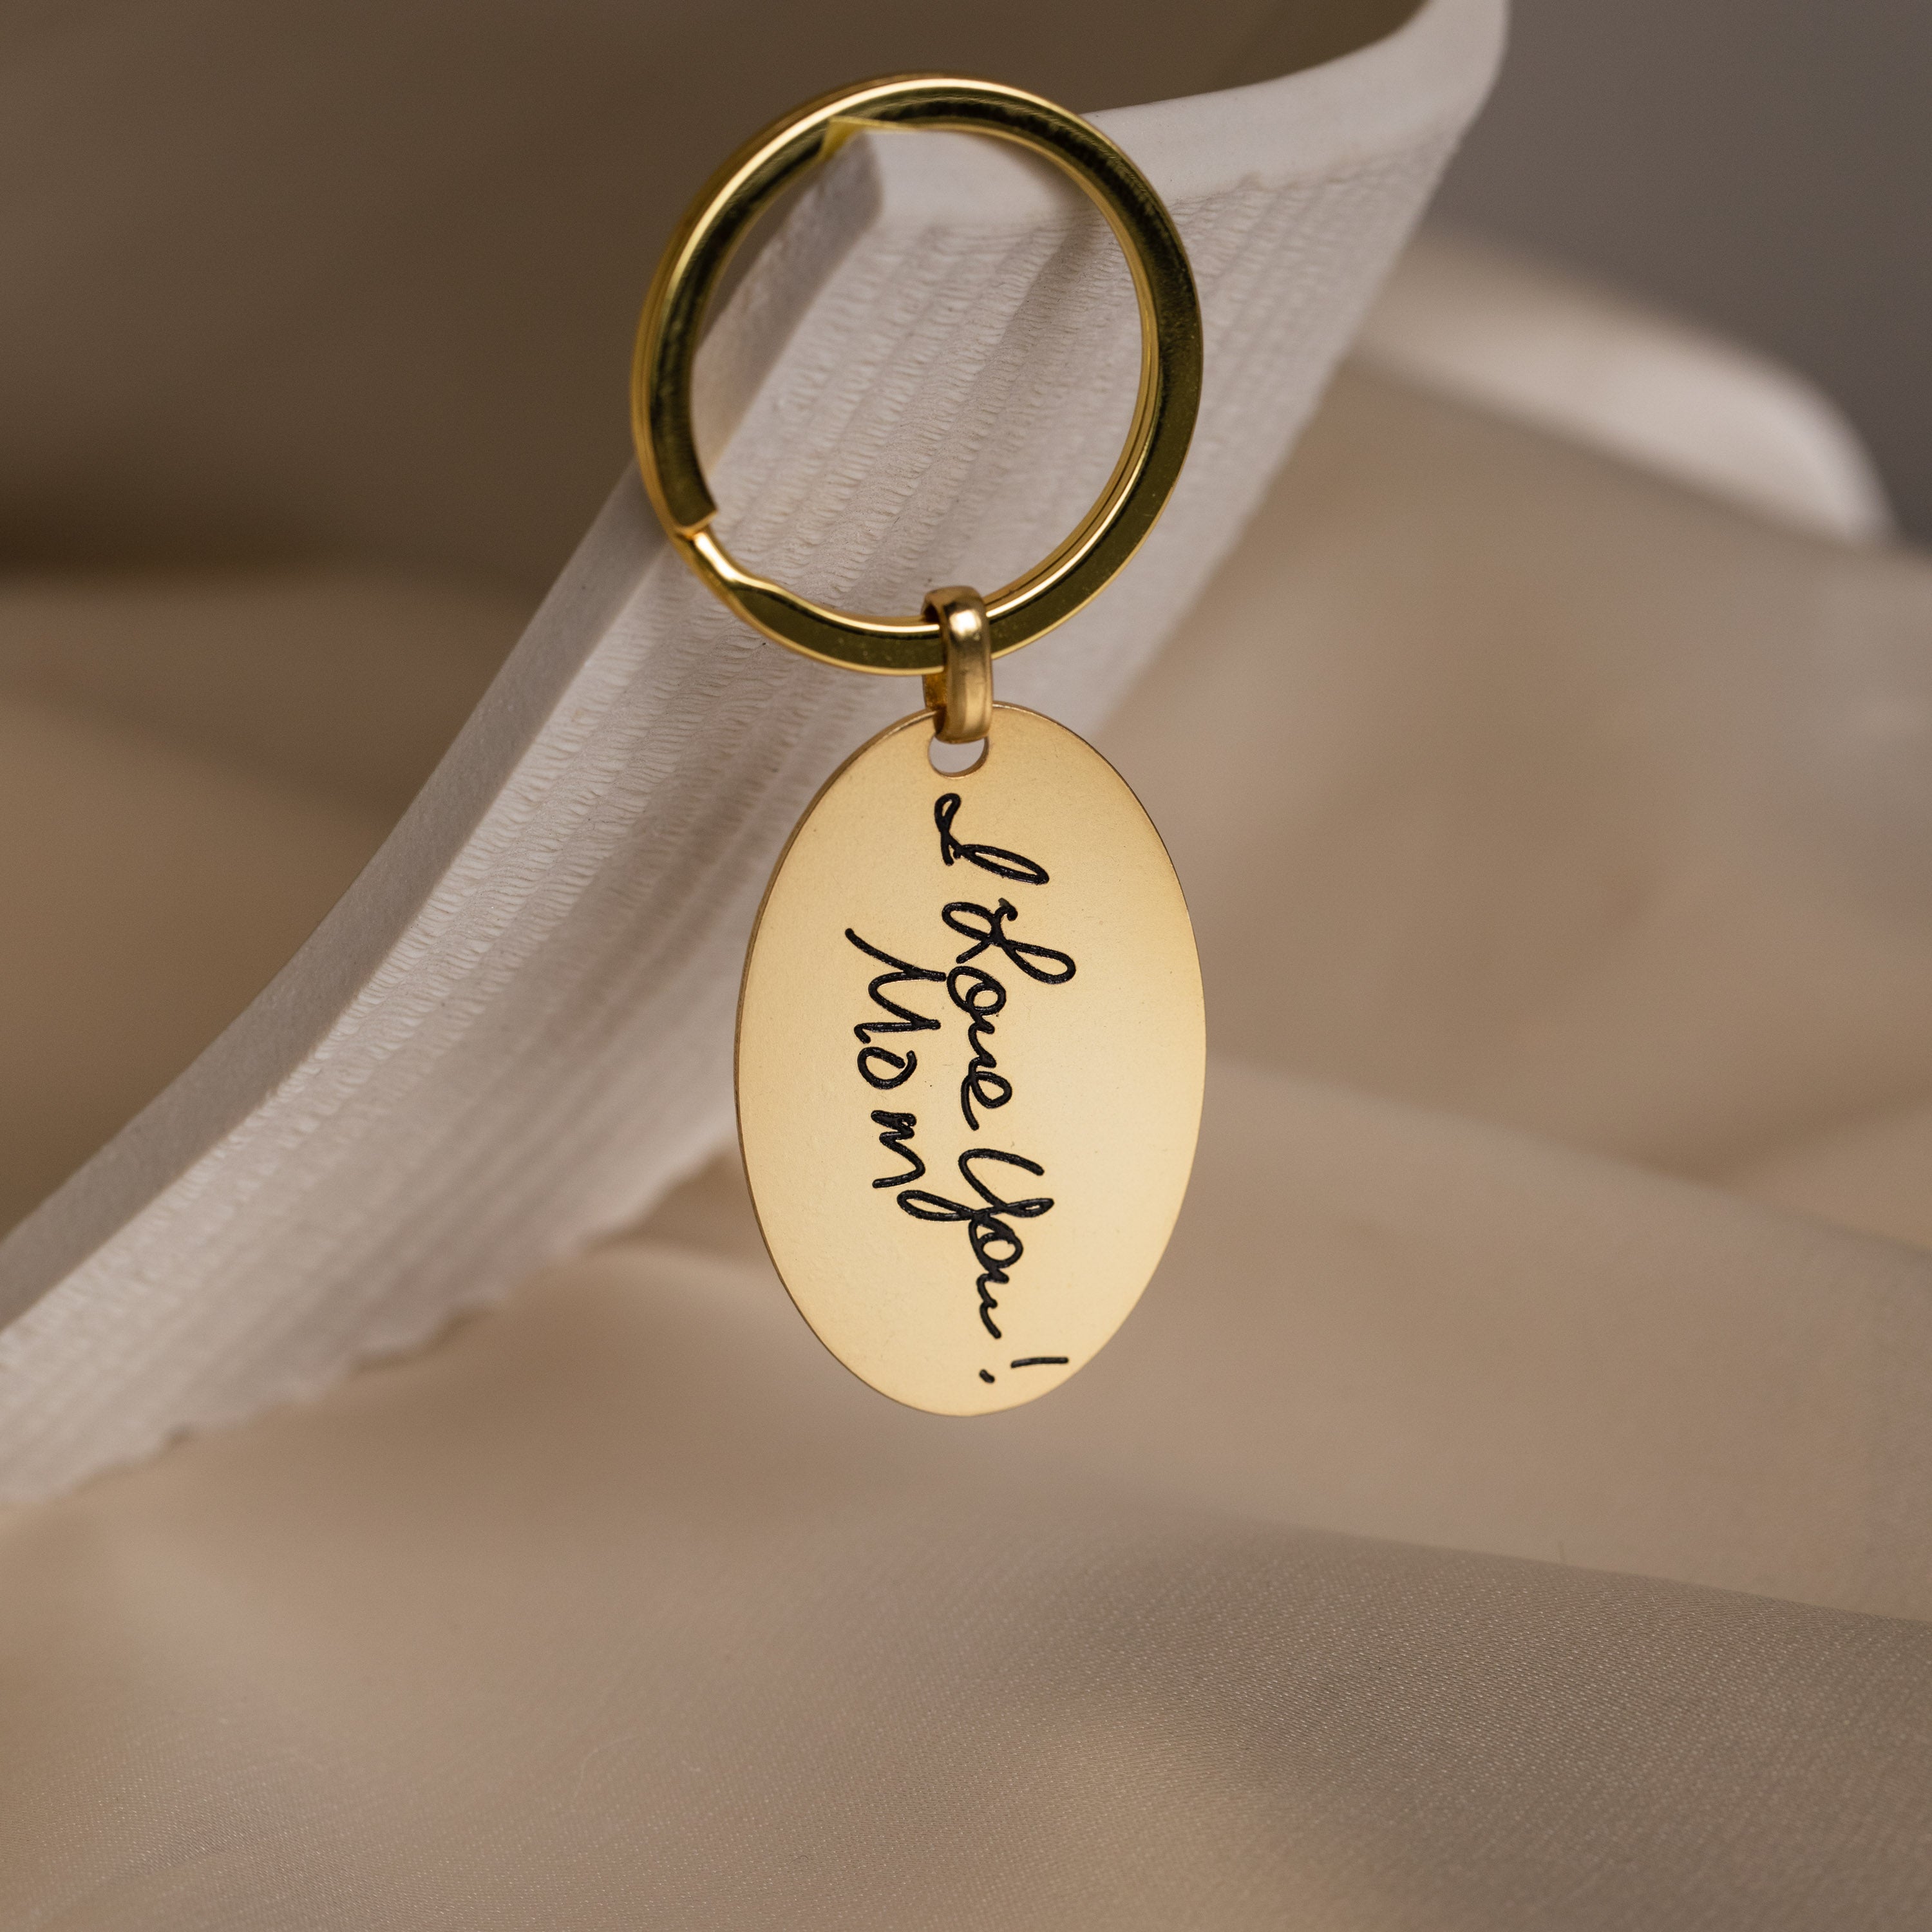 Brass Oval Engraved Key chain or Key Ring